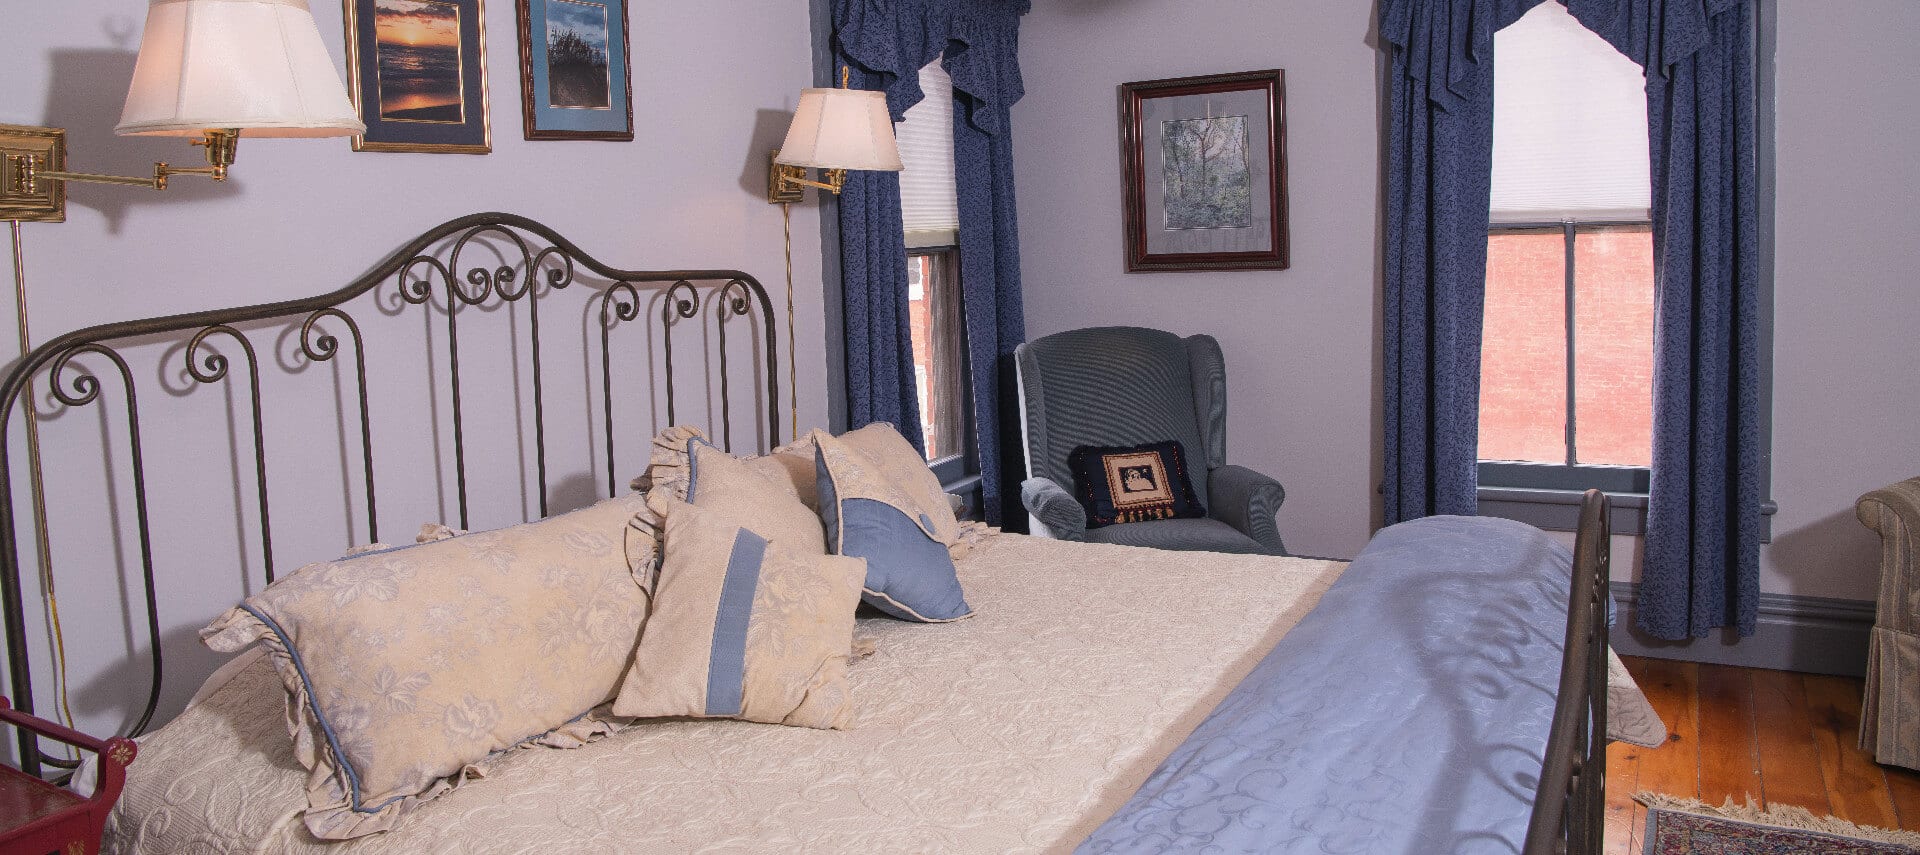 King sized bed with cream and blue bedding and a blue wingback chair.